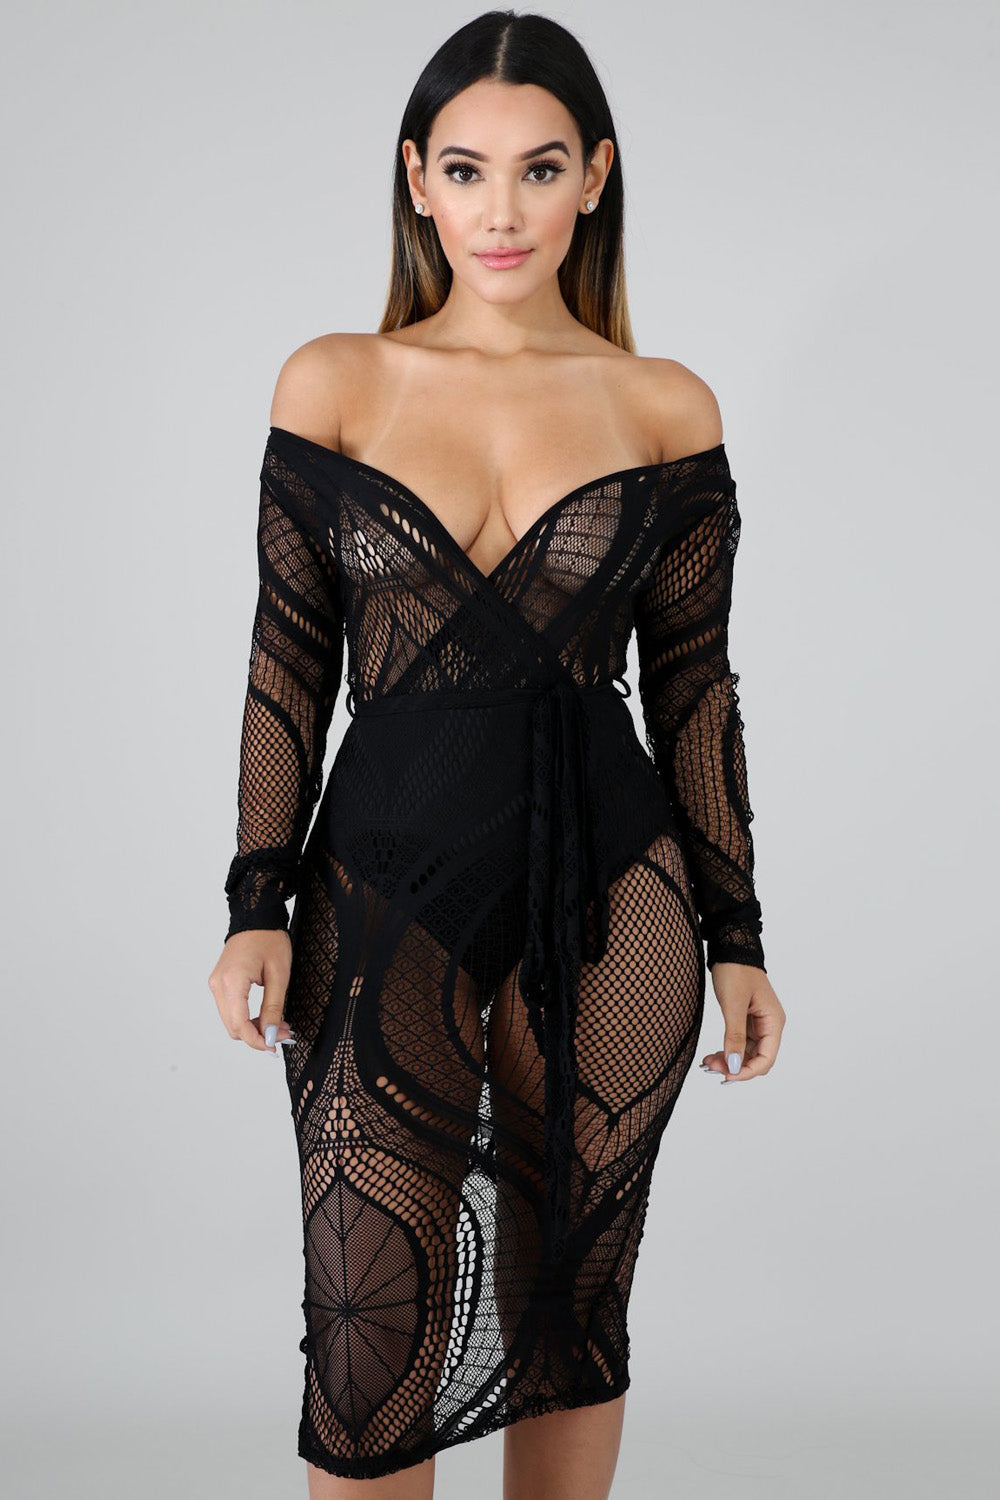 goPals sexy off the shoulder black sheer lace dress. 